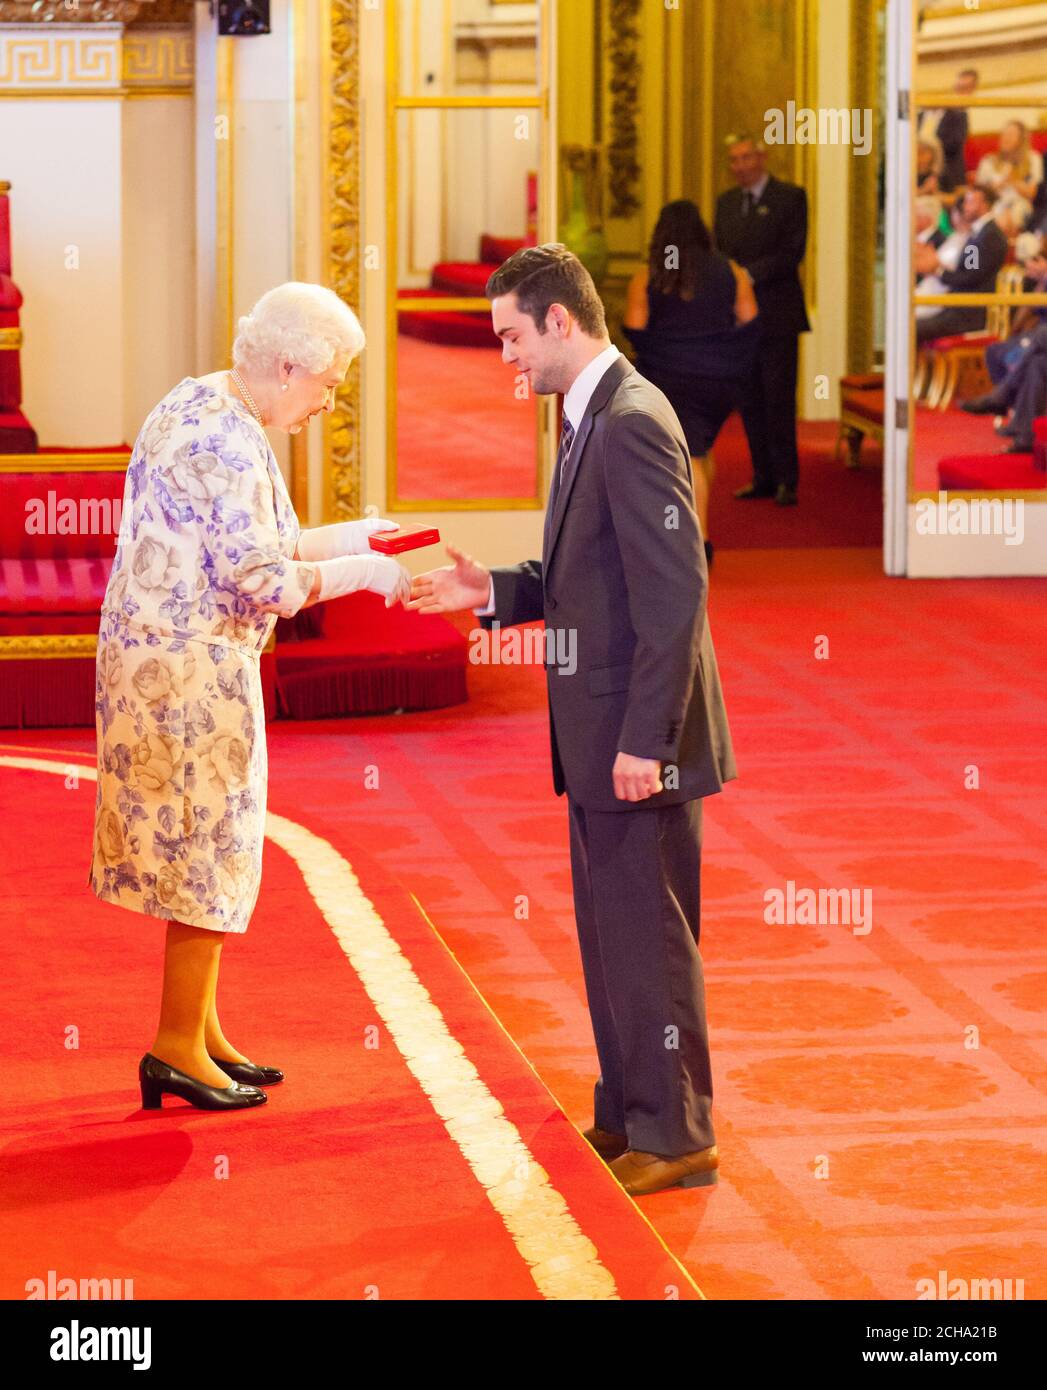 Mr. Alexander Stonyer-Dubinovsky from Australia receives a medal from Queen Elizabeth II during the Queen's Young Leaders Awards 2016 at Buckingham Palace, London. PRESS ASSOCIATION Photo. Picture date: Thursday June 23, 2016. Photo credit should read: Dominic Lipinski/PA Wire Stock Photo